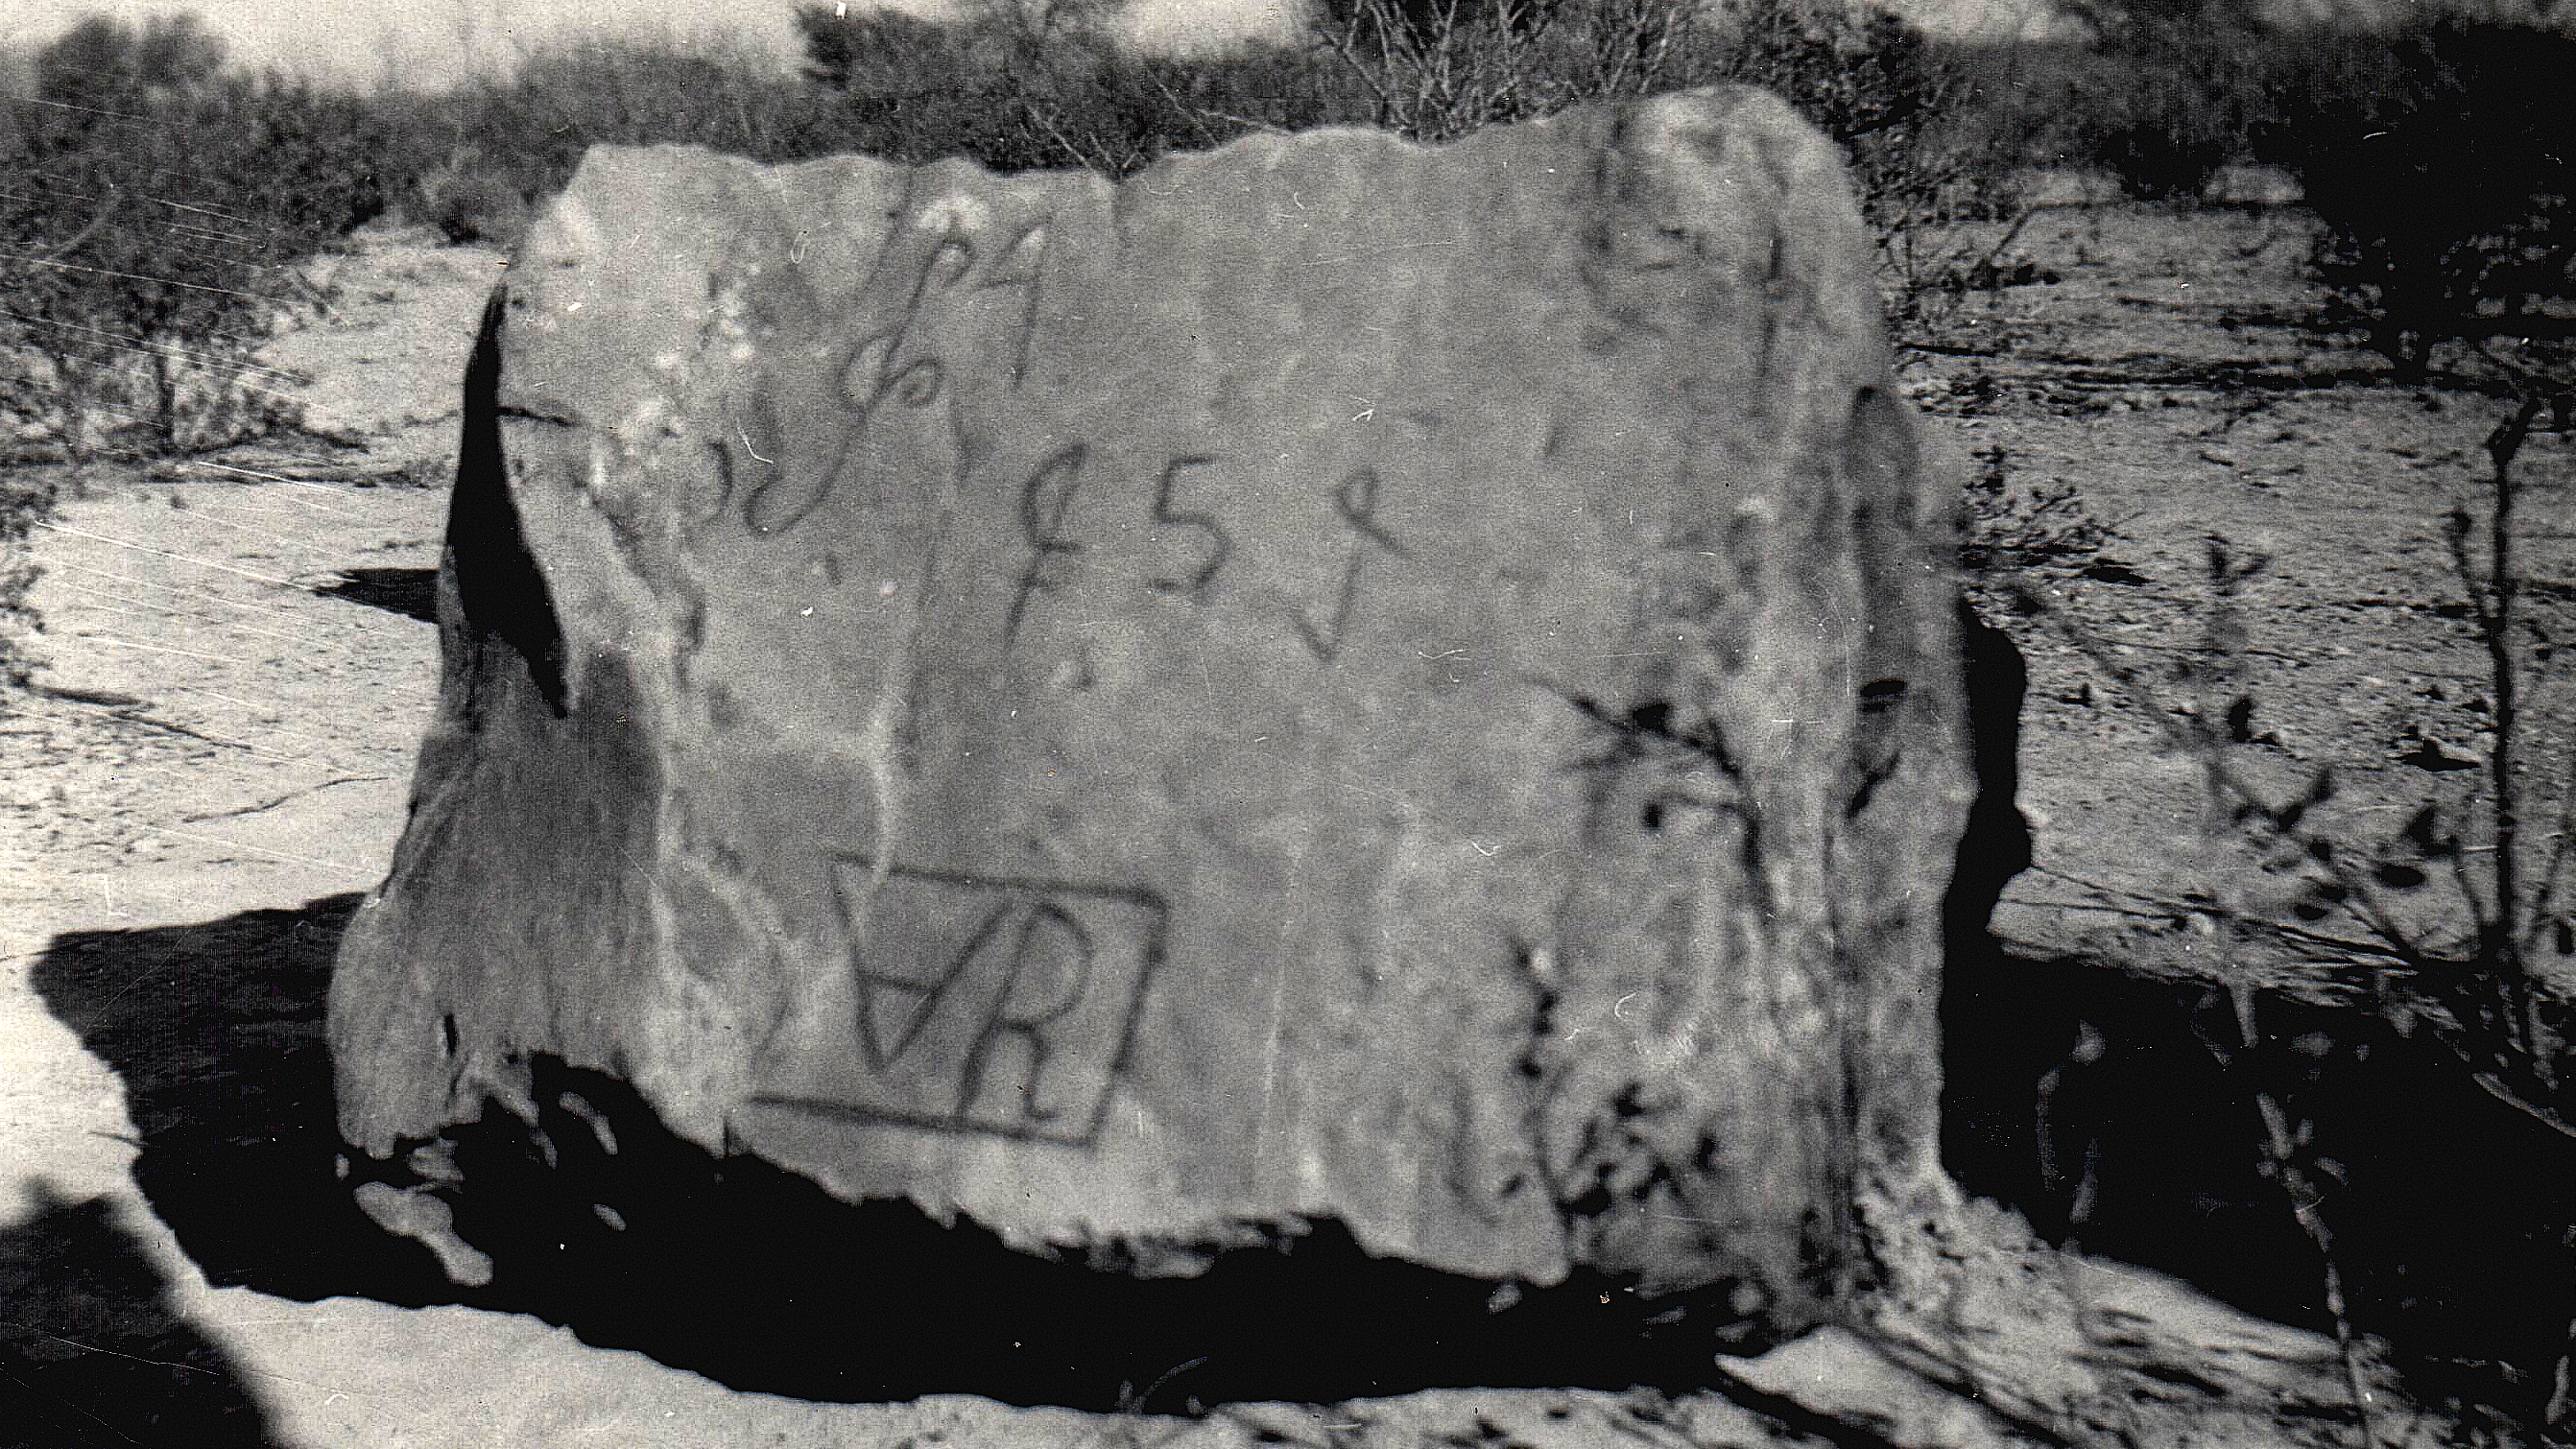 Boulder near Coahuila, Mexico, etched with marks resembling Cherokee syllabary characters.